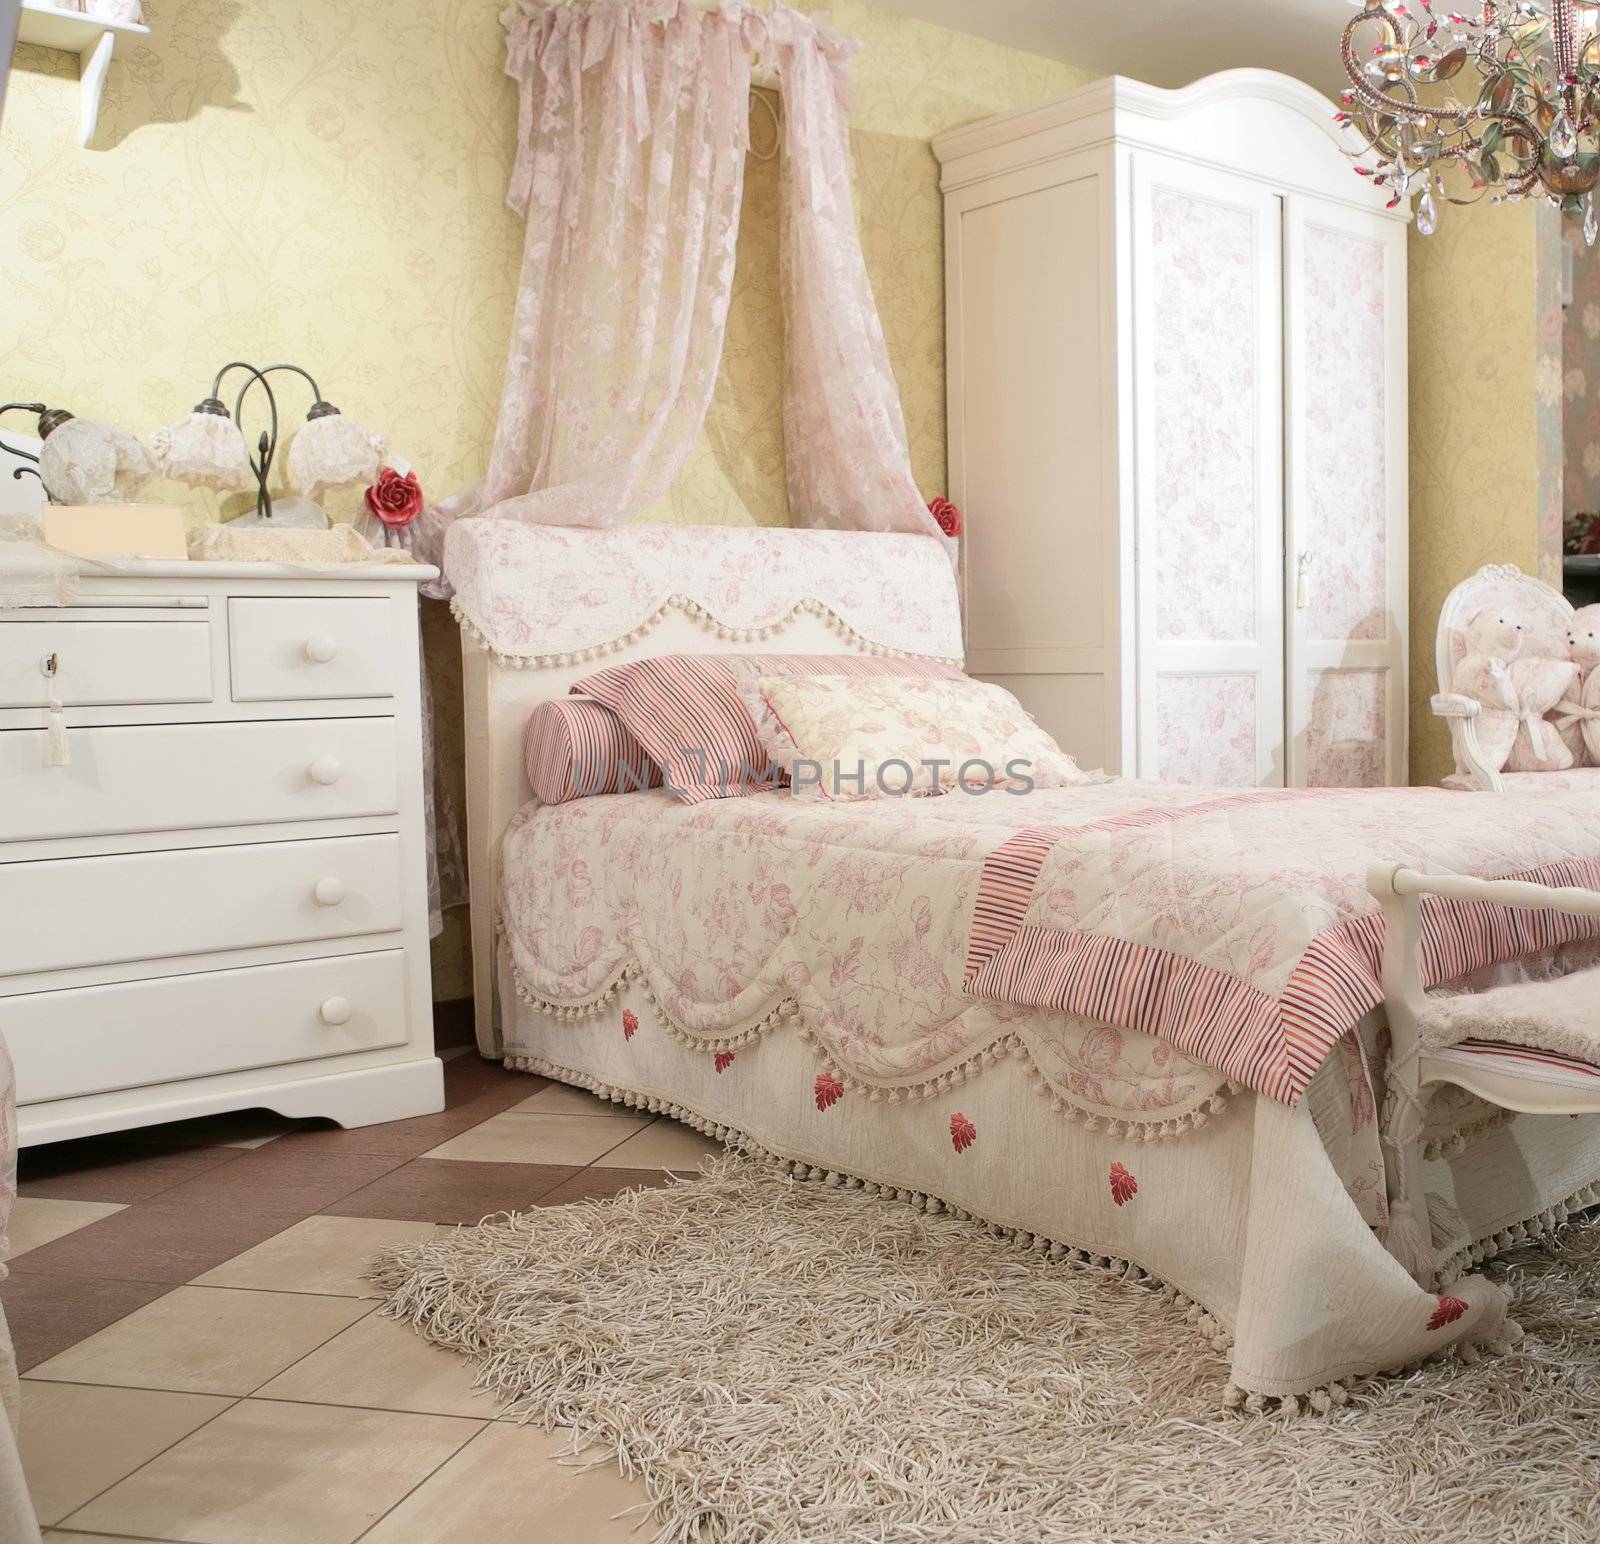 interior to luxurious baby bedroom in rococo style, expensive furniture